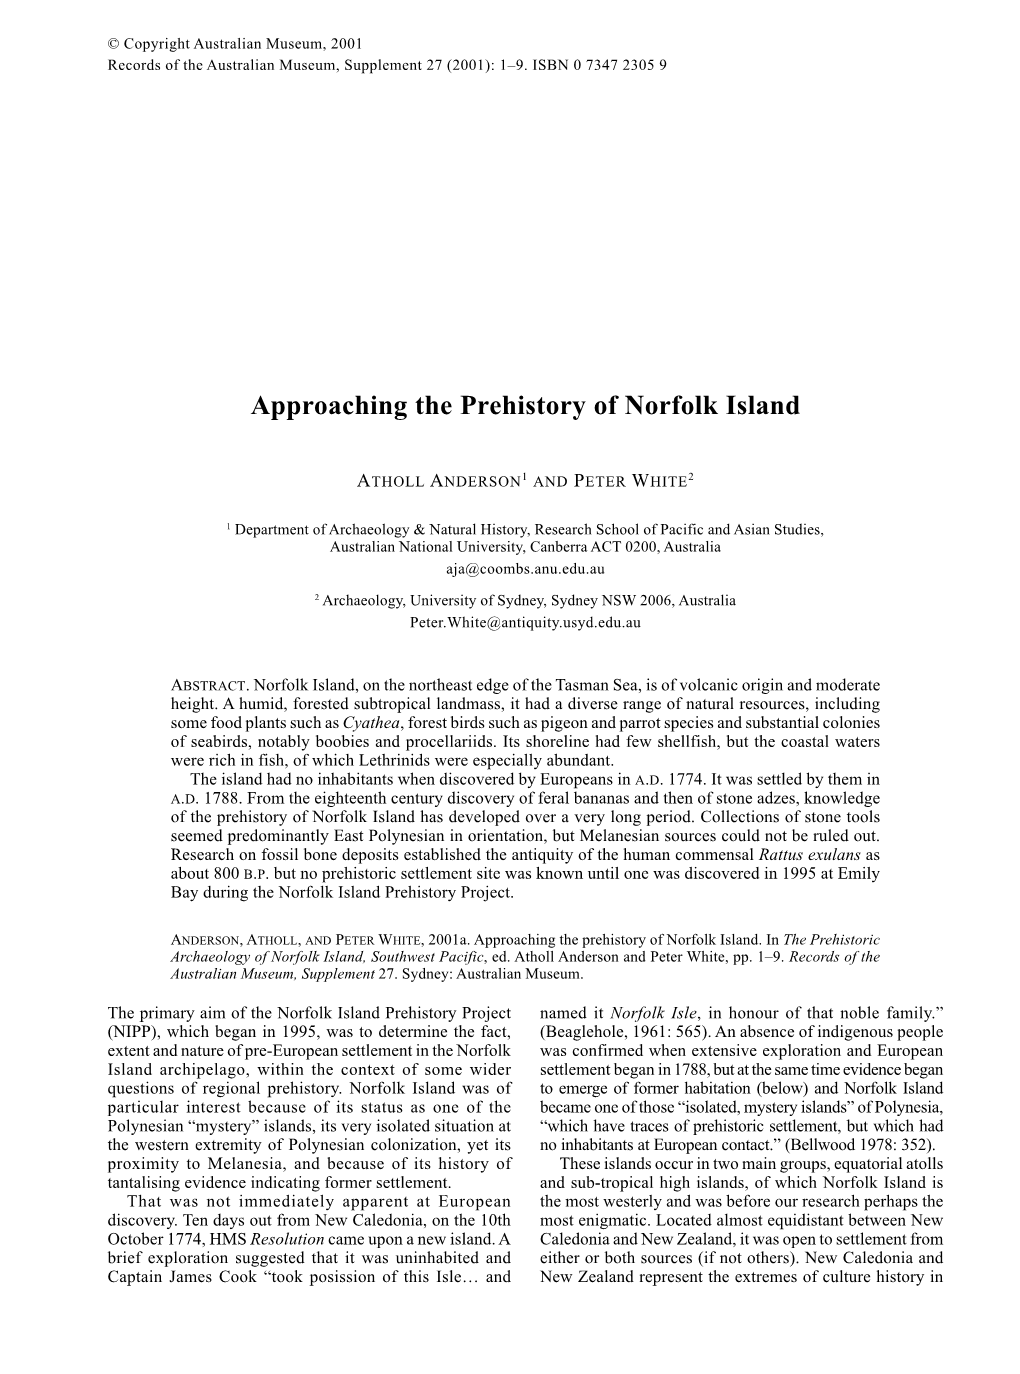 Approaching the Prehistory of Norfolk Island